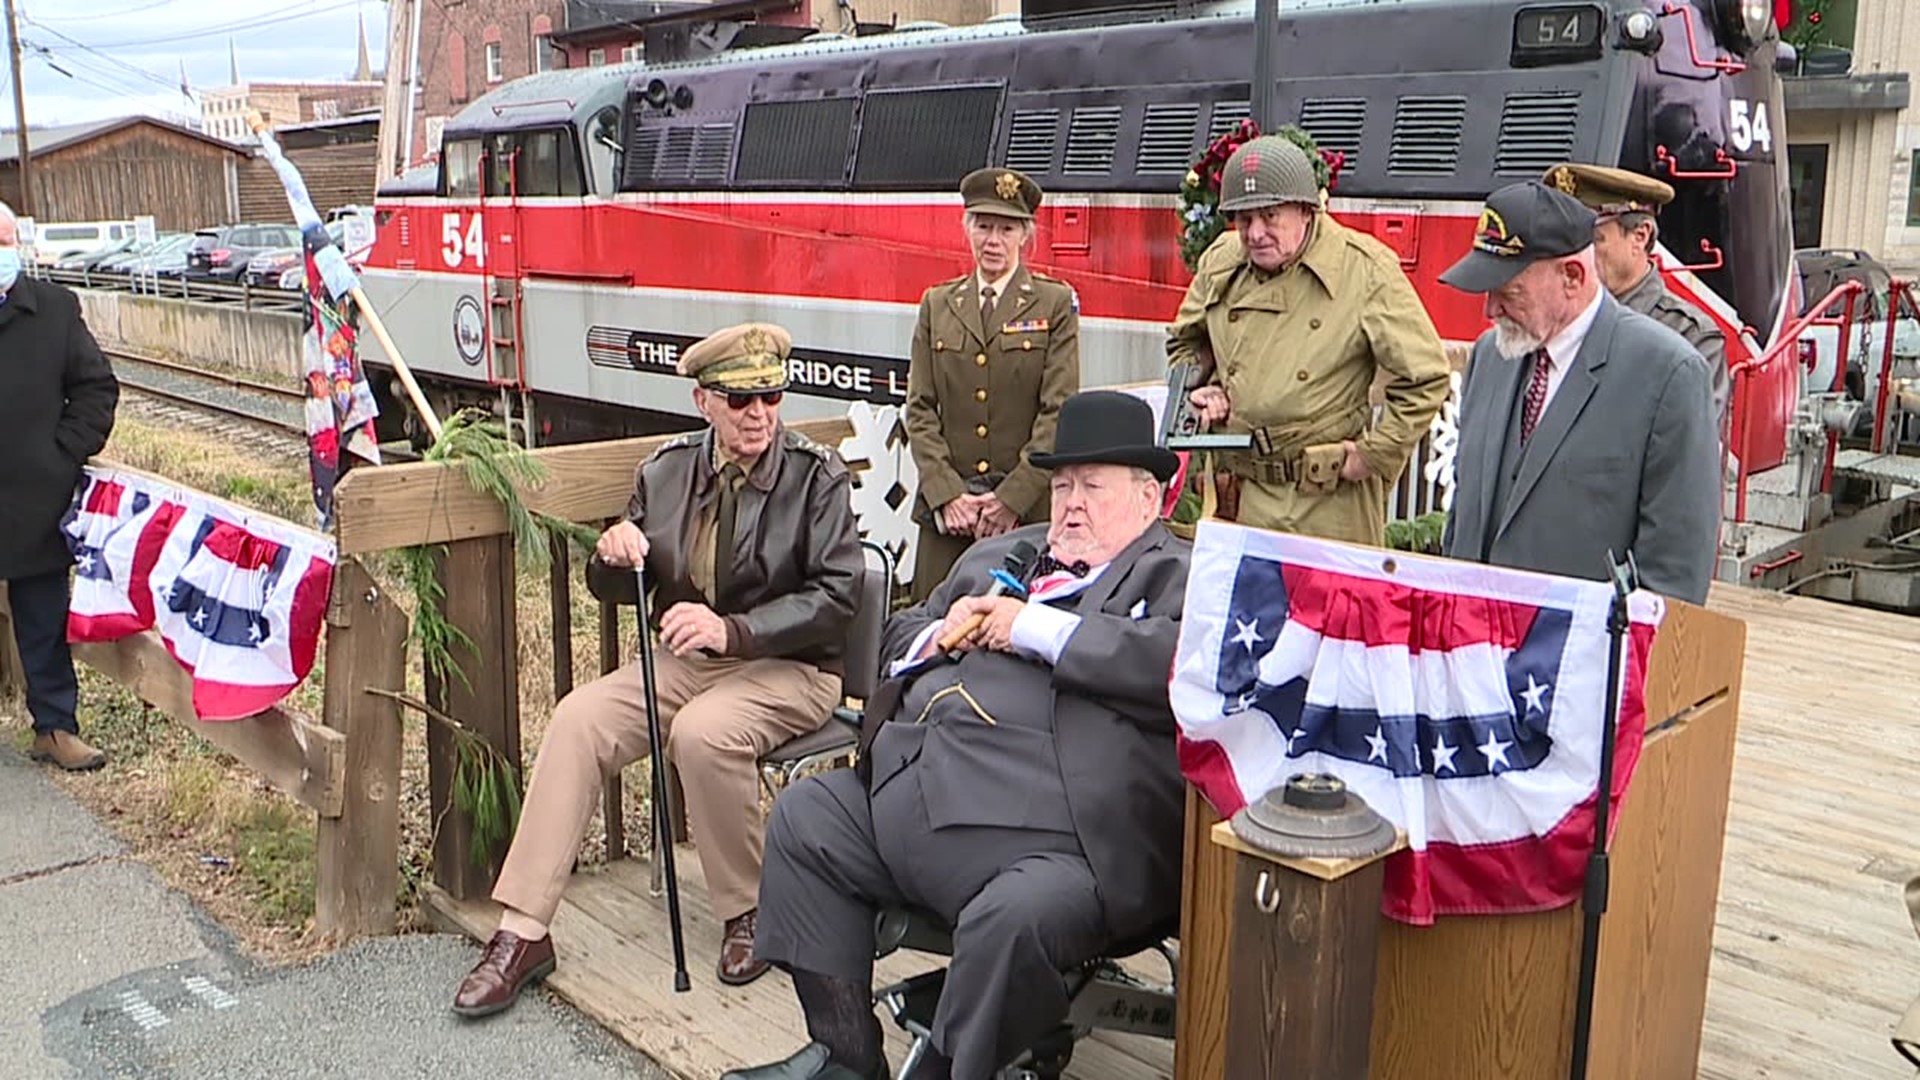 The Stourbridge Line in Honesdale offered a scenic trip along the Lackawaxen River for the anniversary.